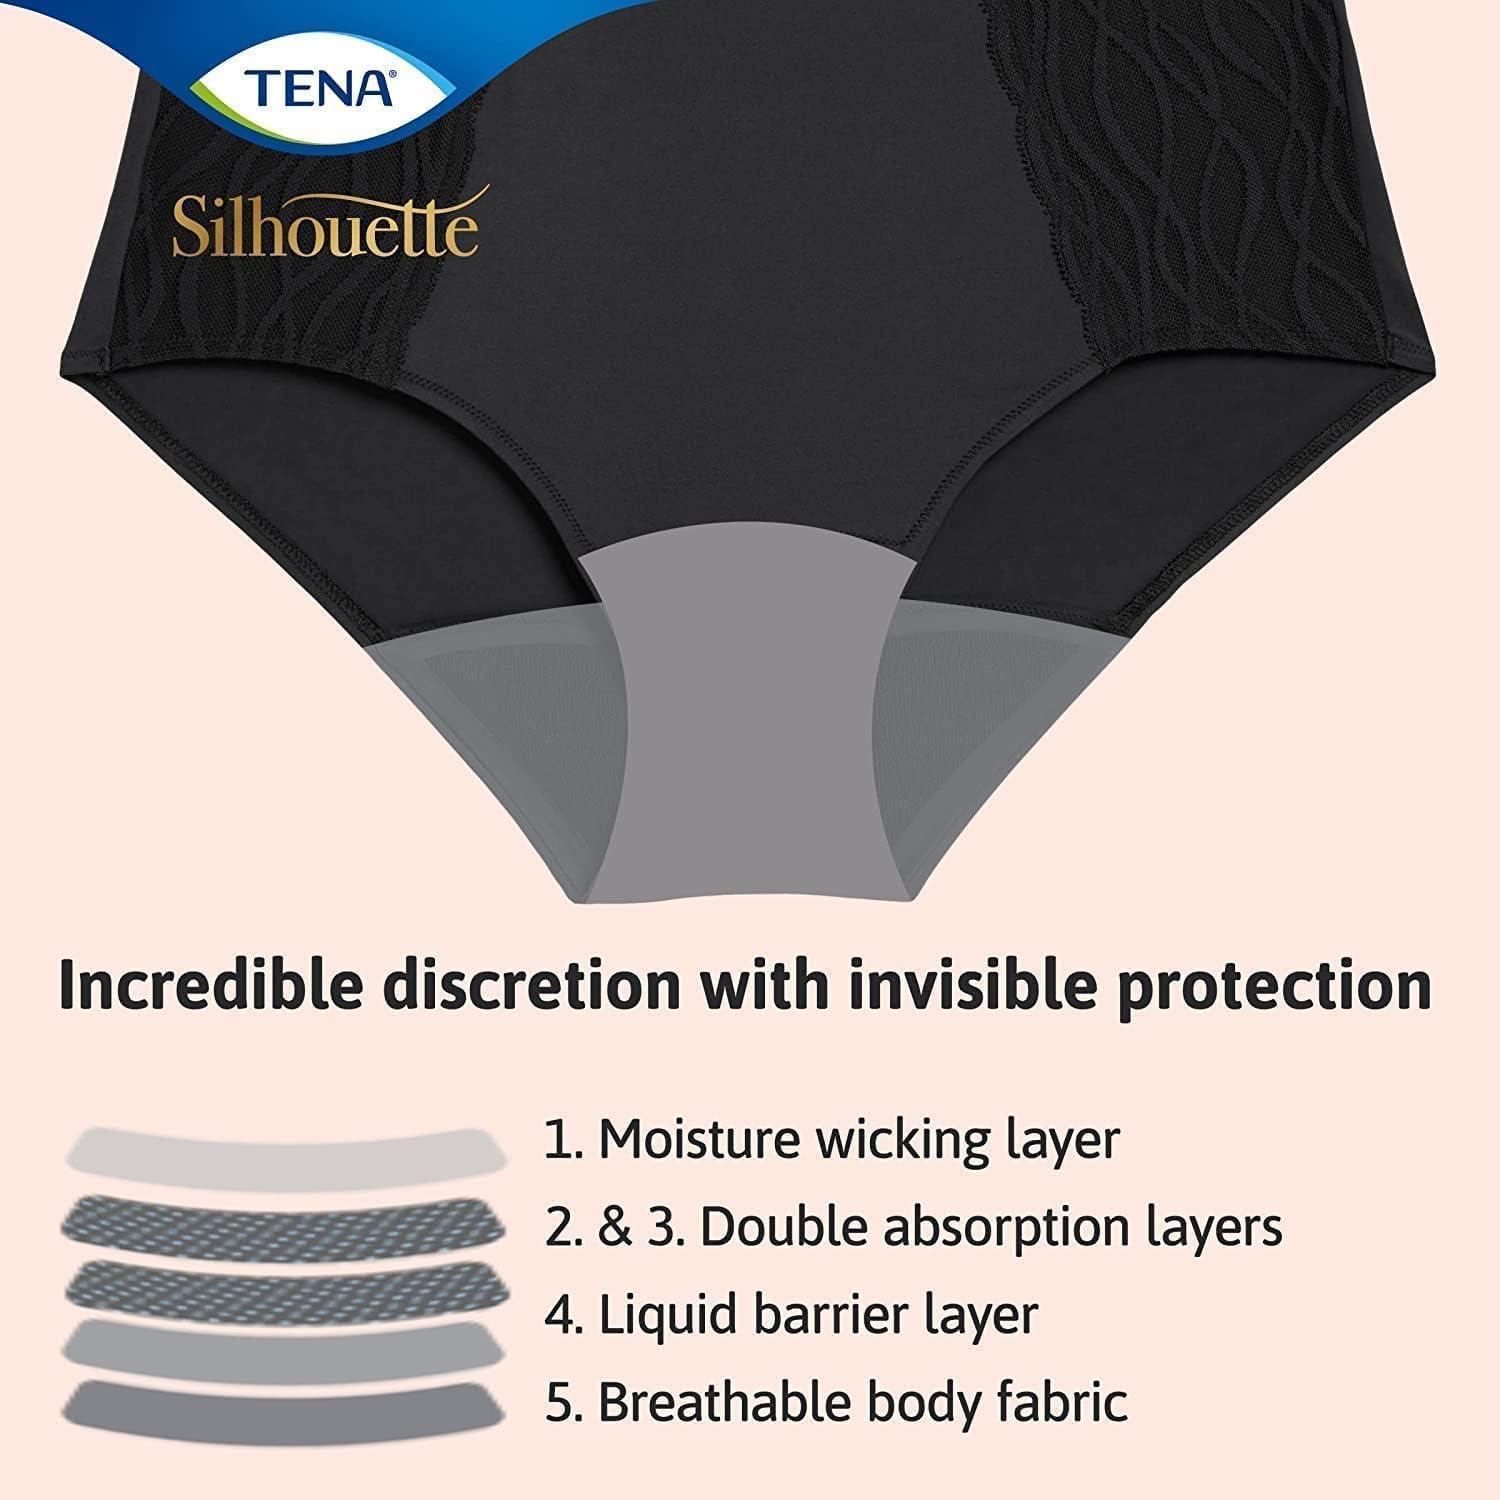 TENA Silhouette - Women's Washable Incontinence Pants - Soft and